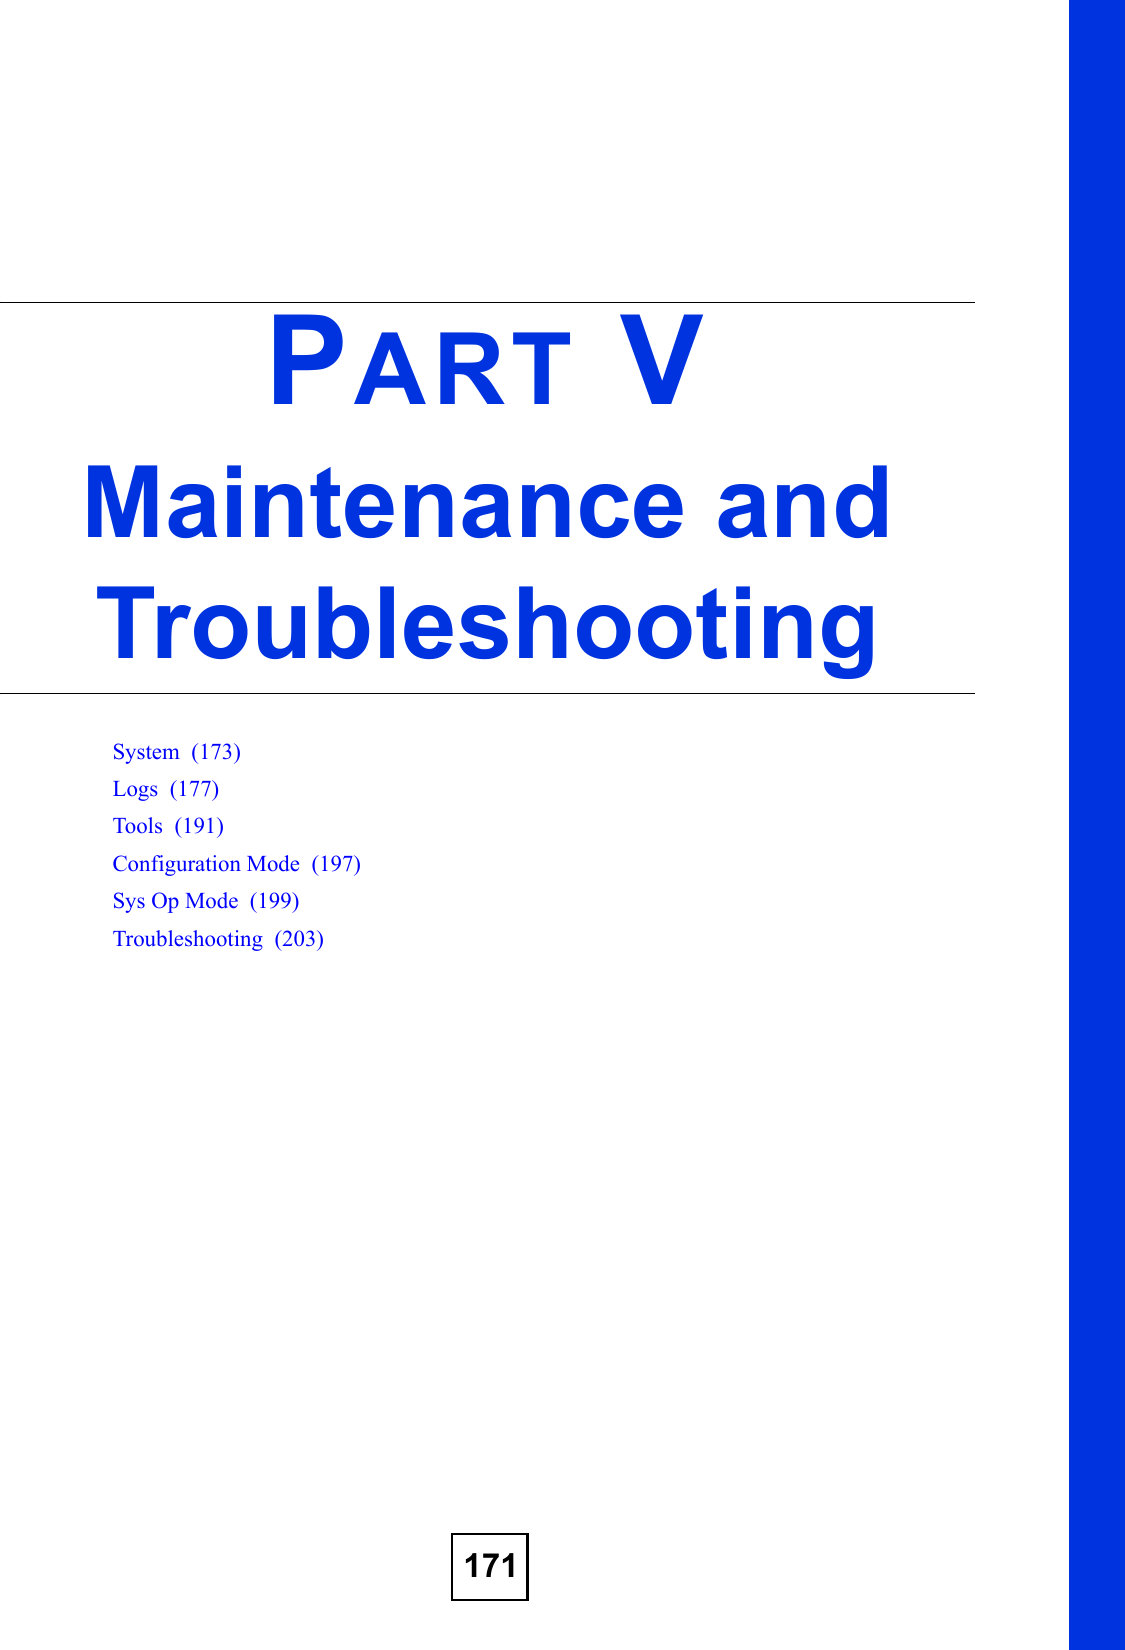 171PART VMaintenance and TroubleshootingSystem  (173)Logs  (177)Tools  (191)Configuration Mode  (197)Sys Op Mode  (199)Troubleshooting  (203)